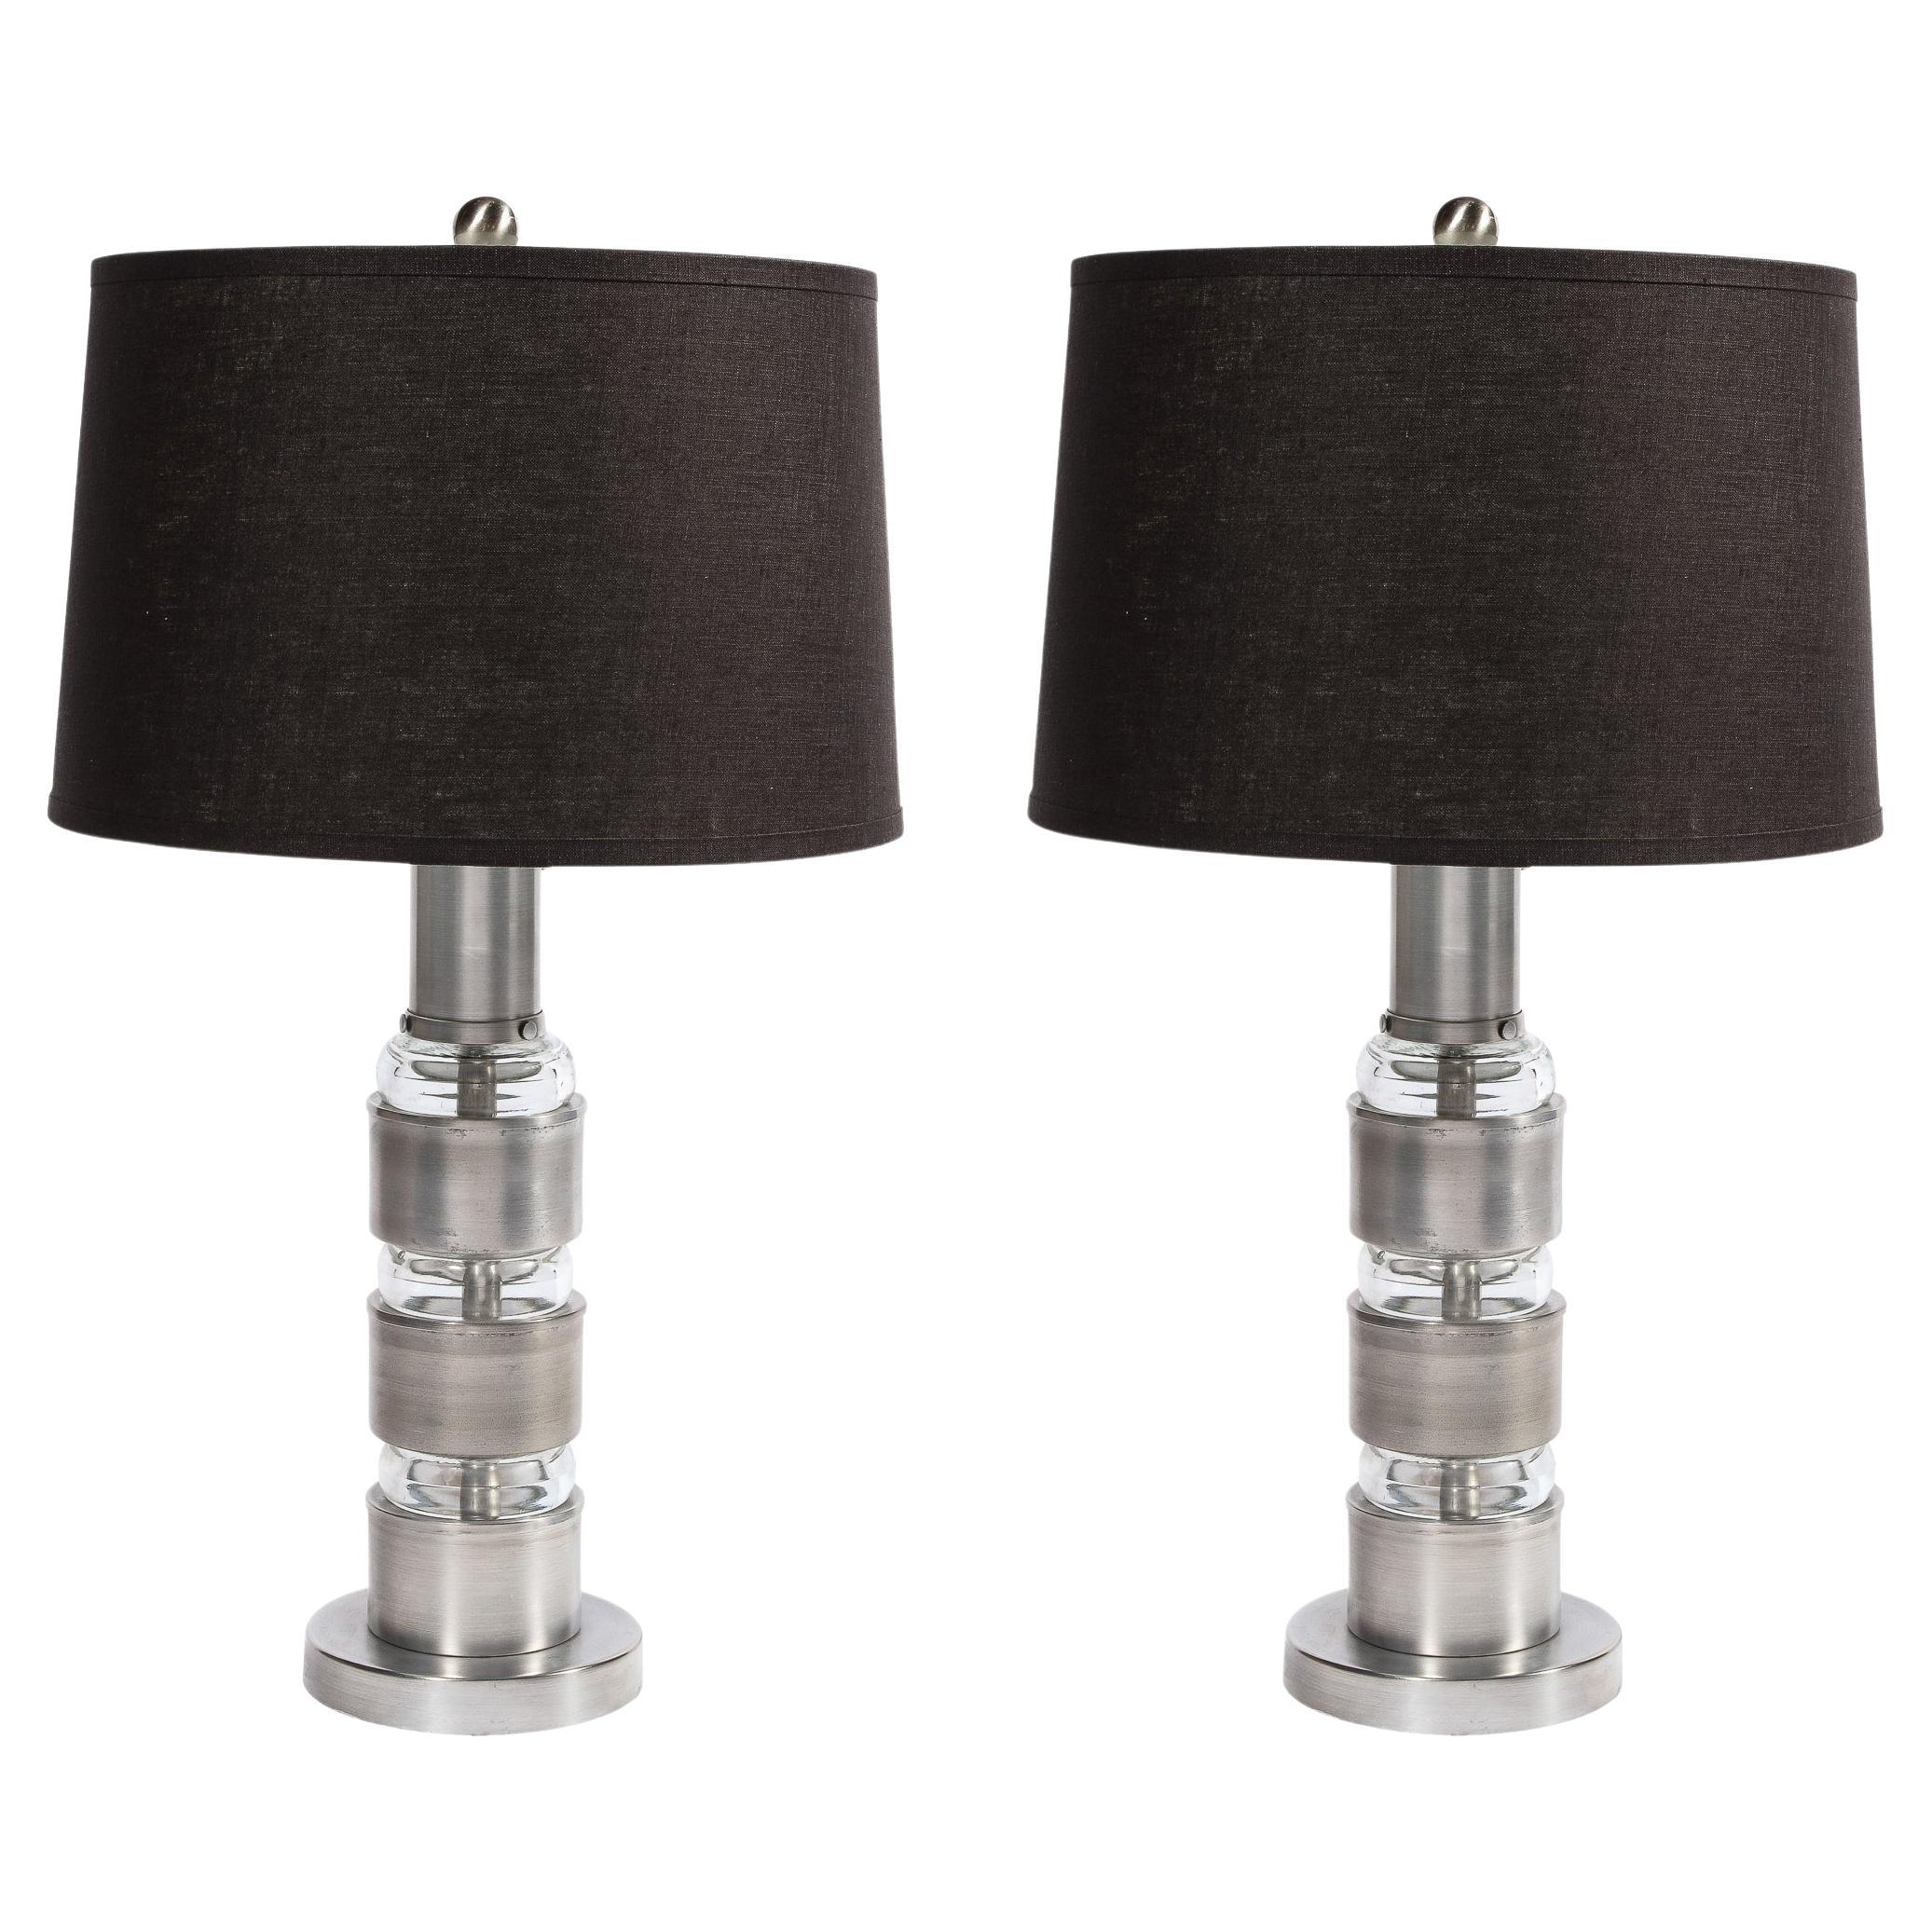 Art Deco Machine Age Table Lamps in Brushed Aluminum & Glass by Russell Wright